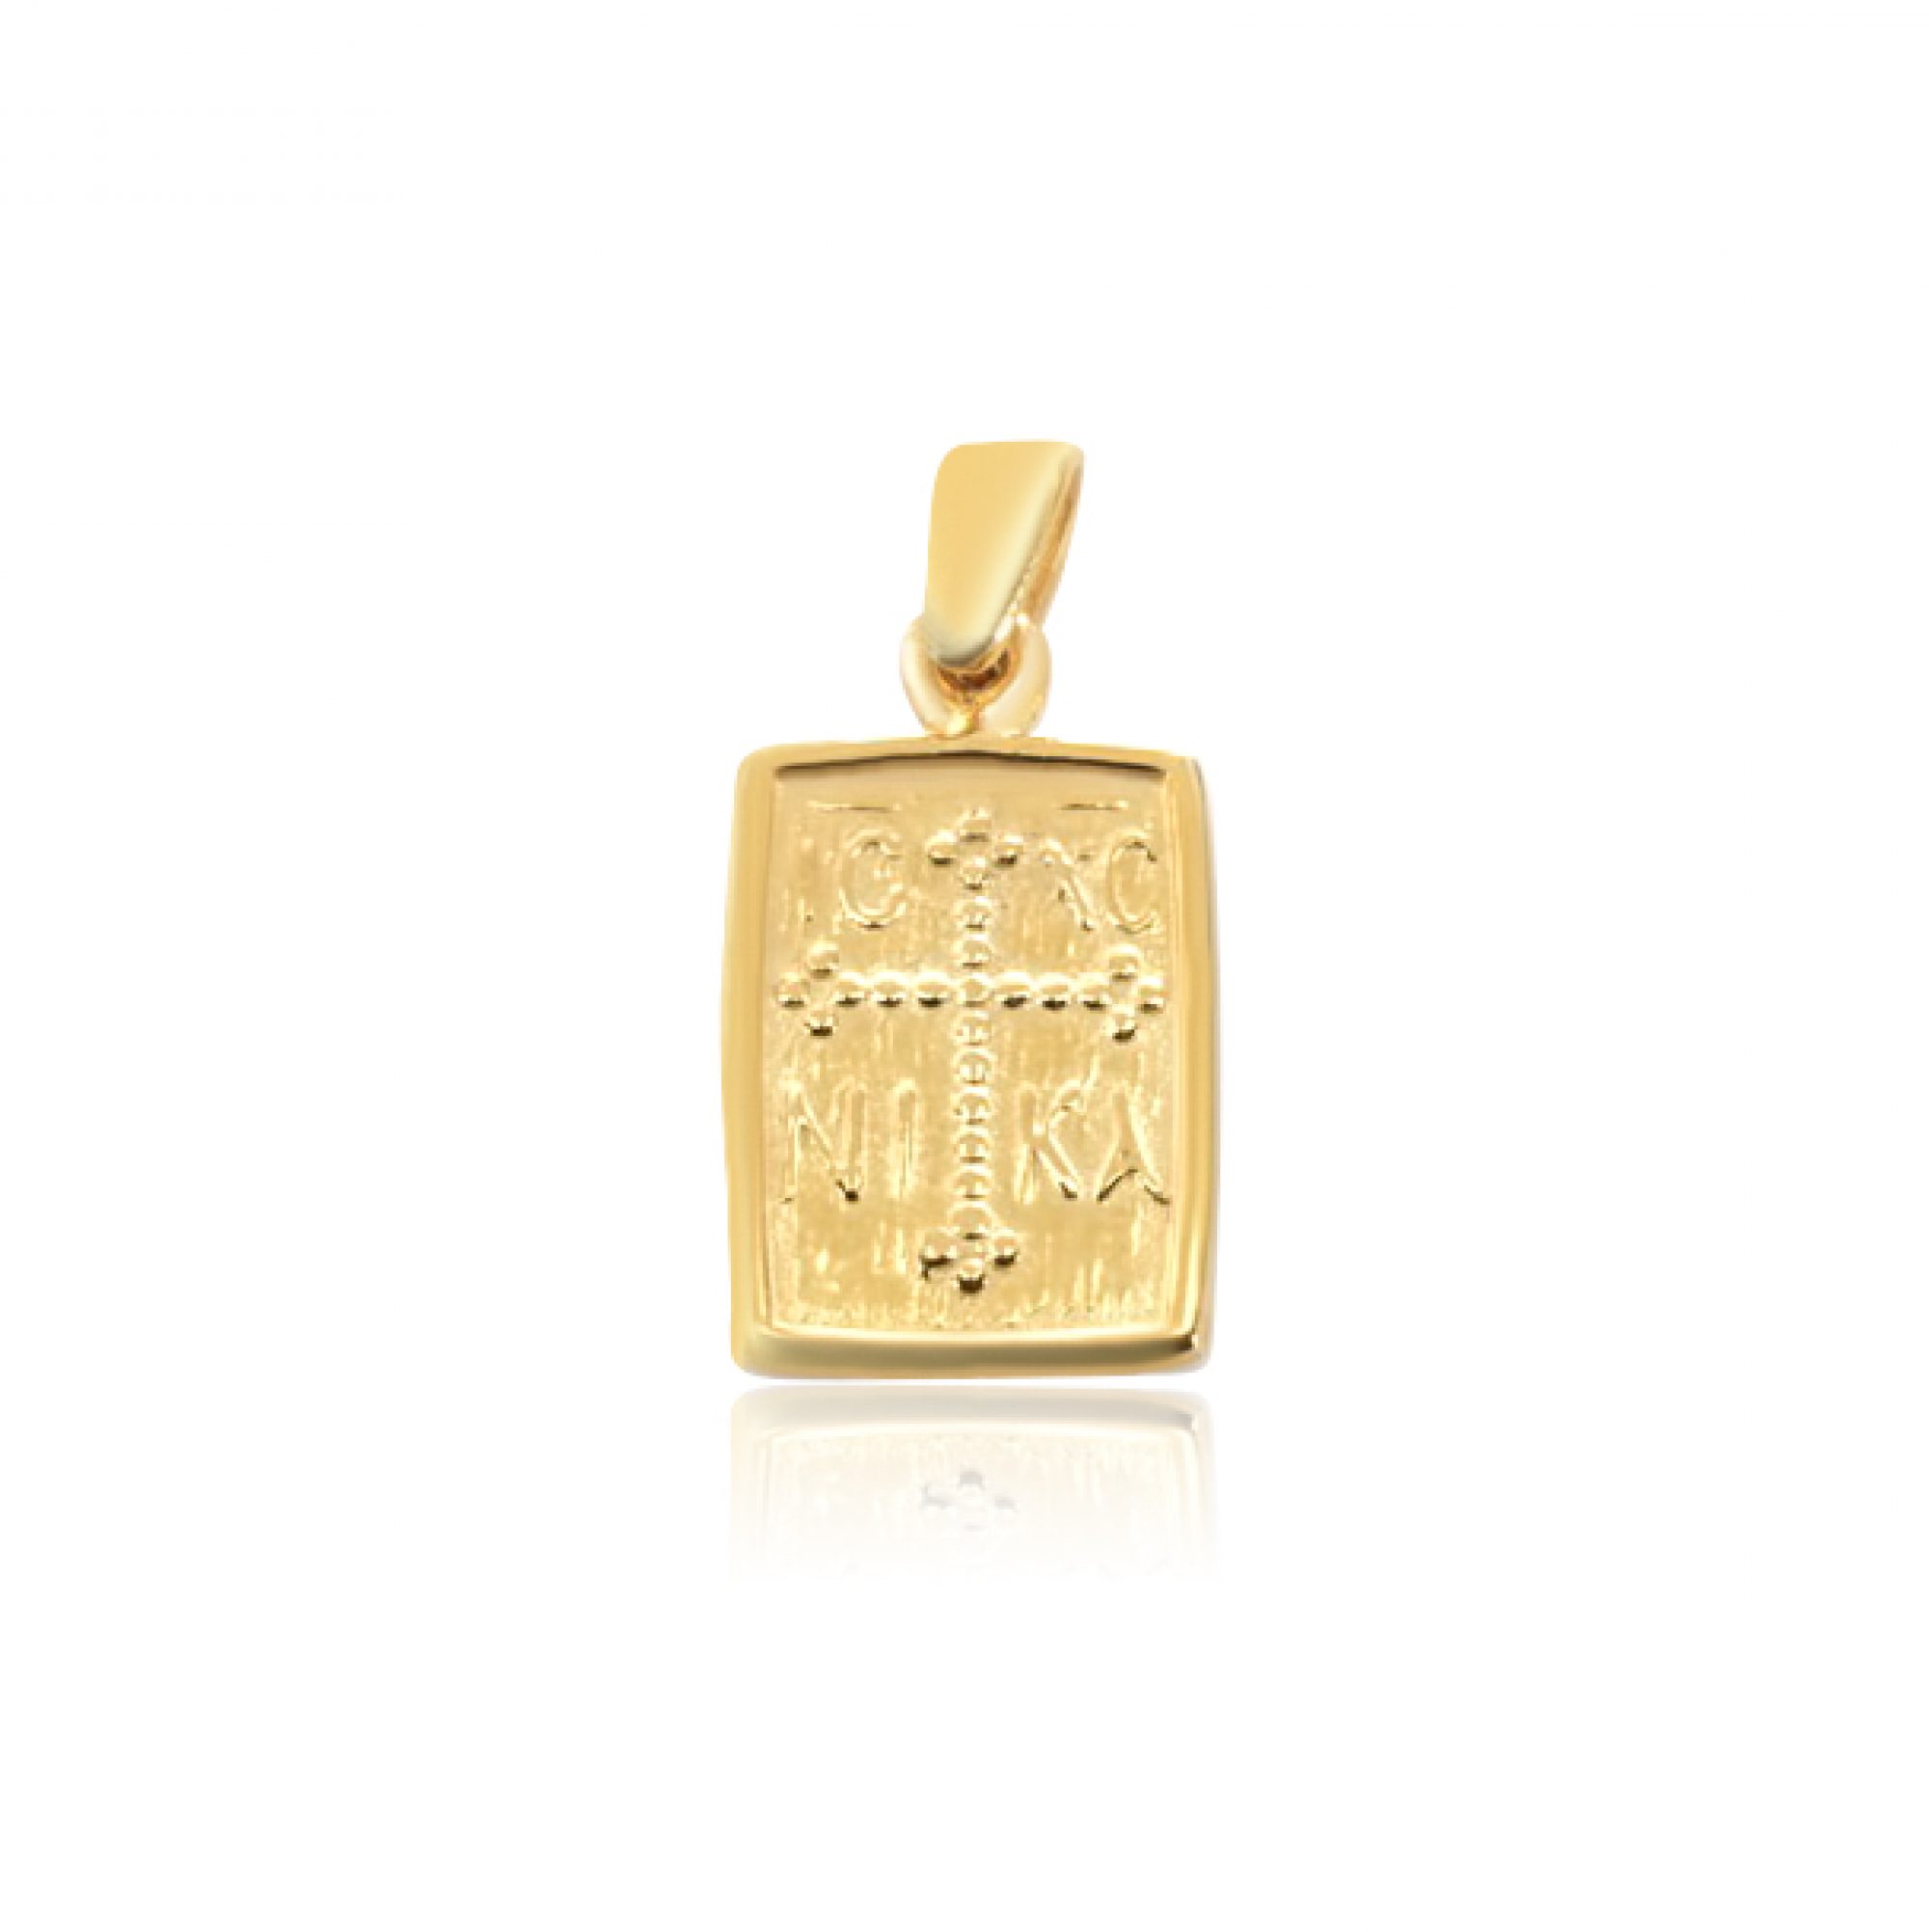 Gold plated constantine pendant